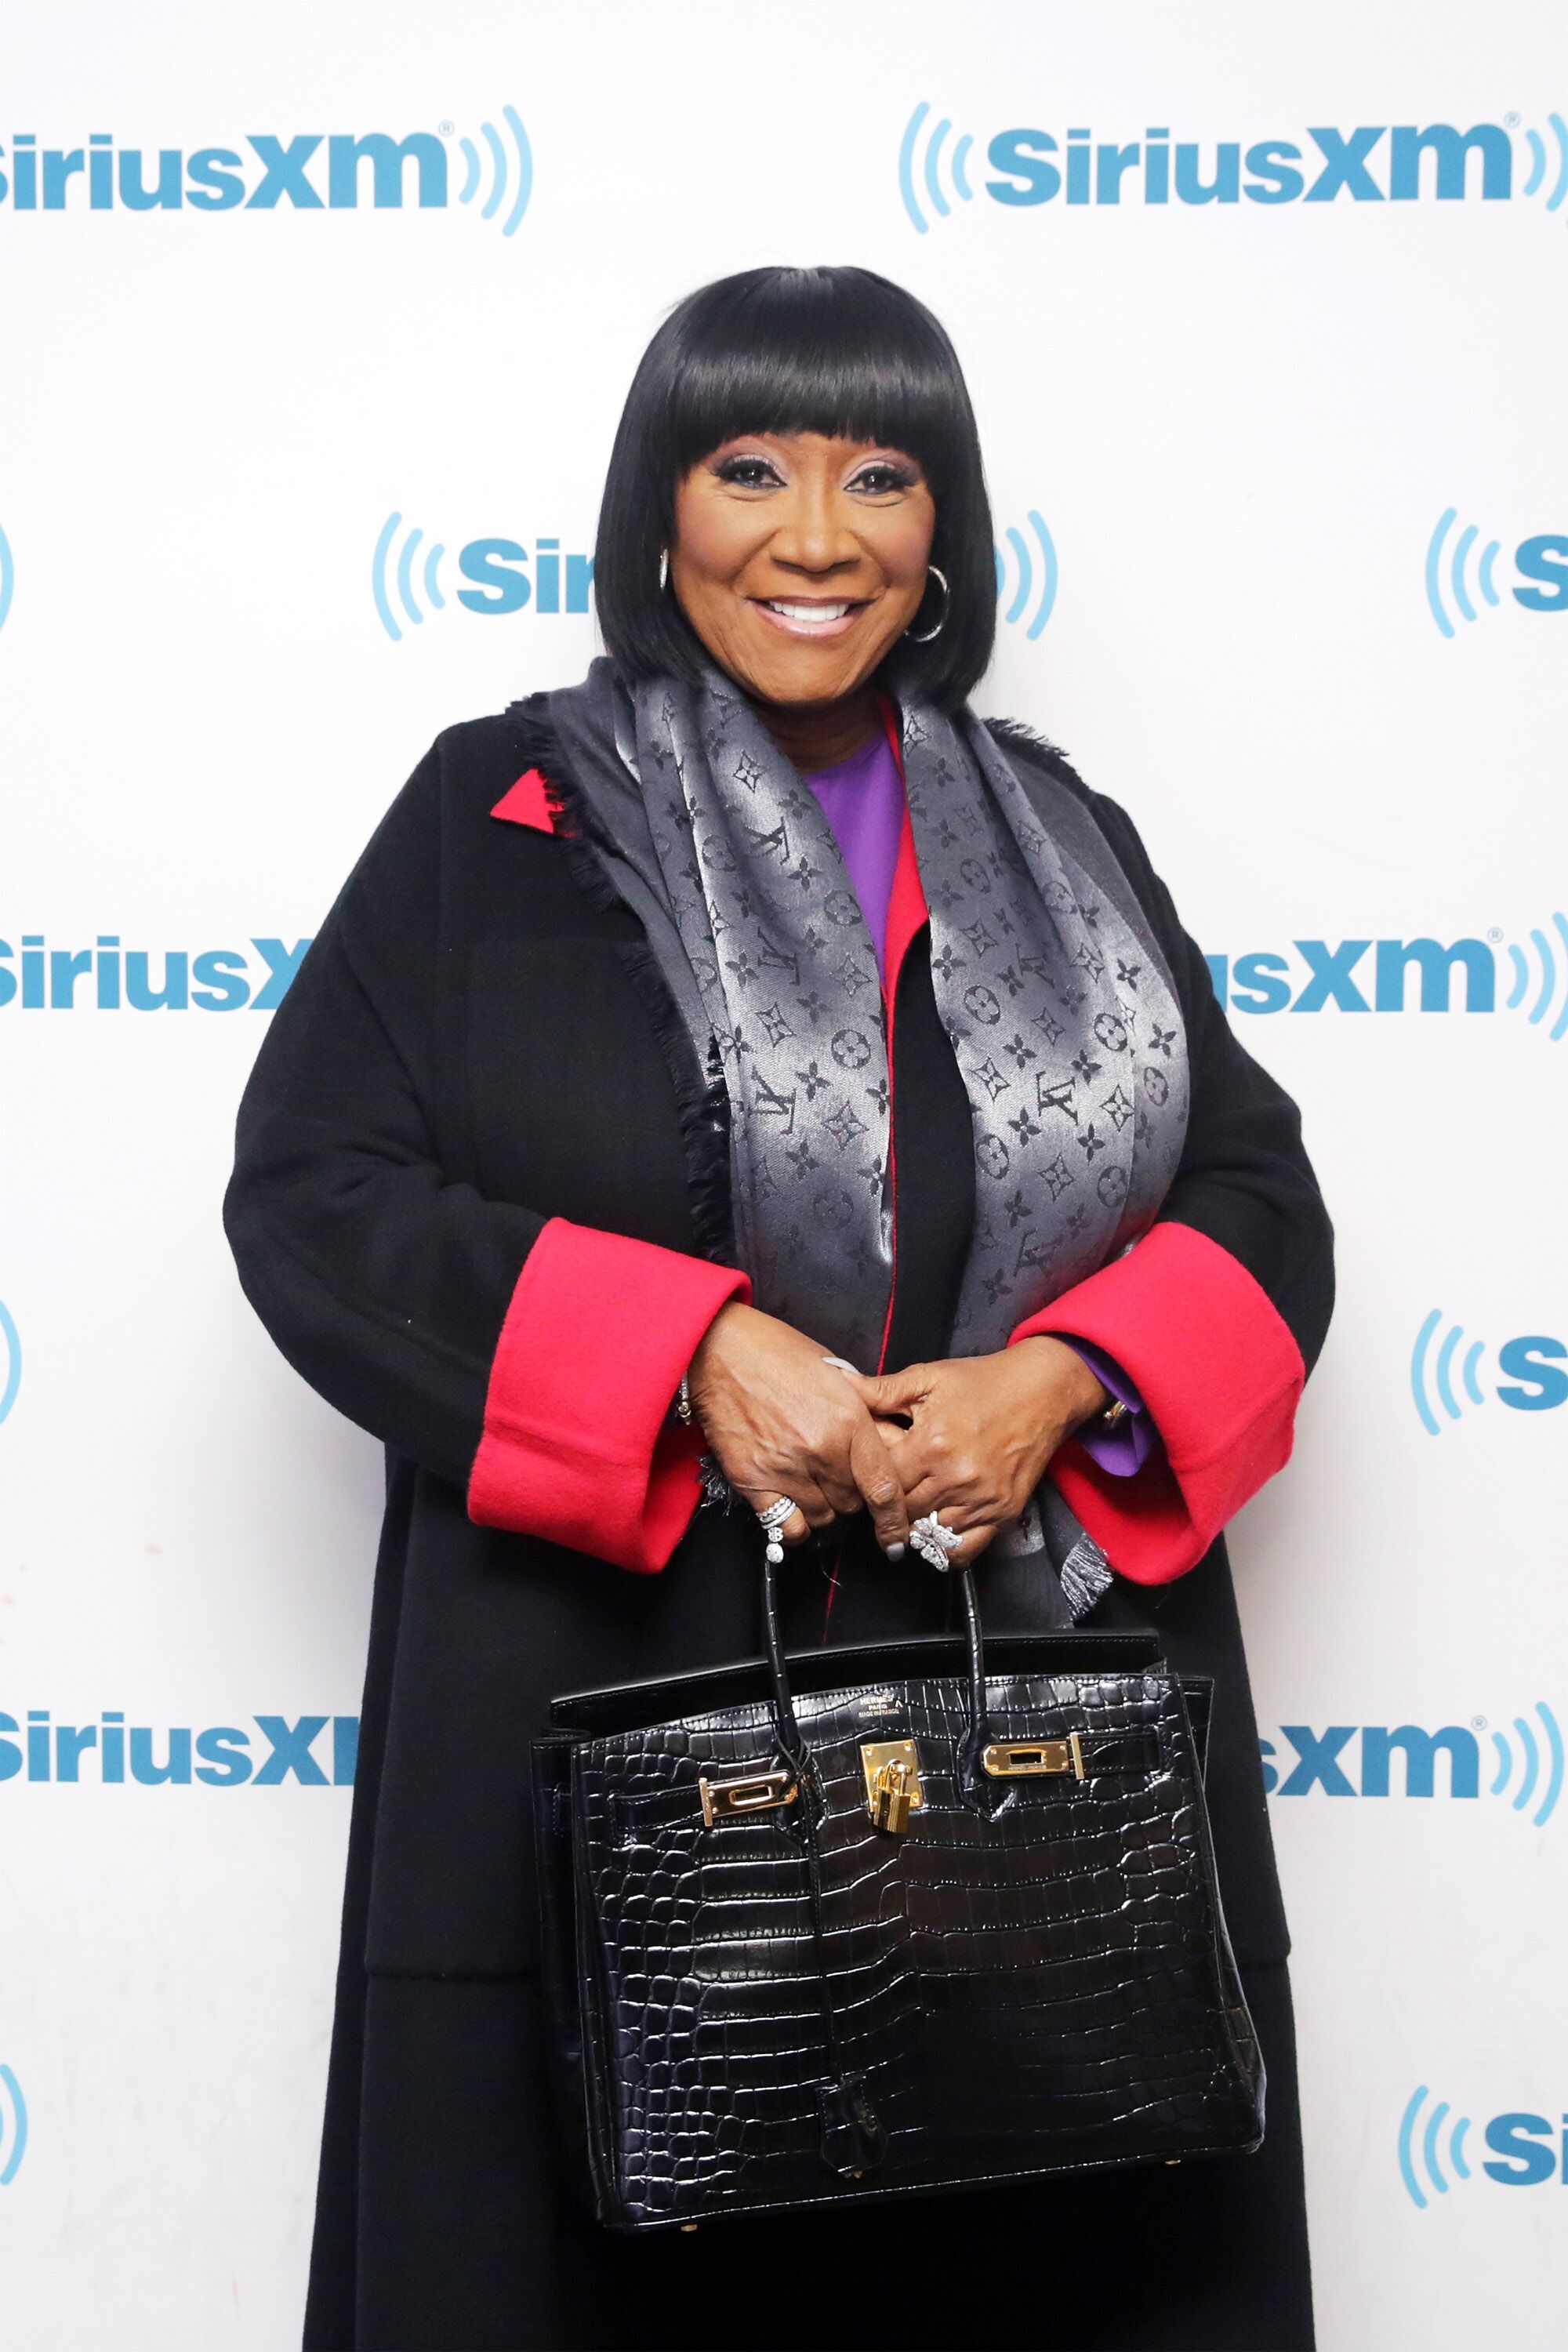 Patti LaBelle at a SiriusXM red carpet event | Source: Getty Images/GlobalImagesUkraine